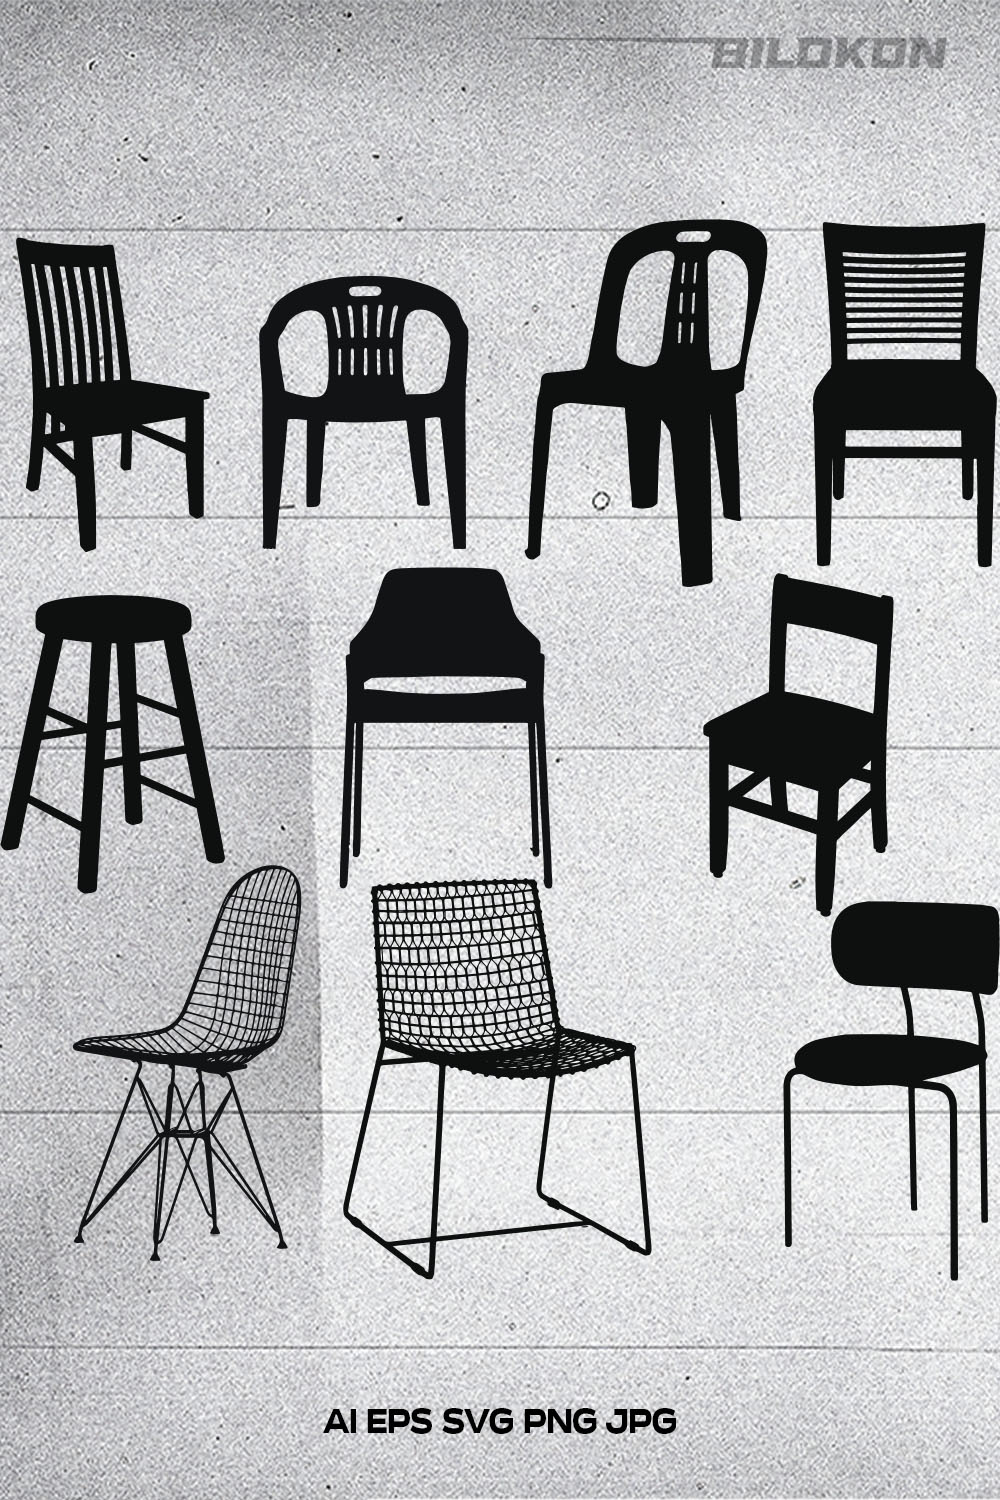 A selection of wonderful images of chair silhouettes